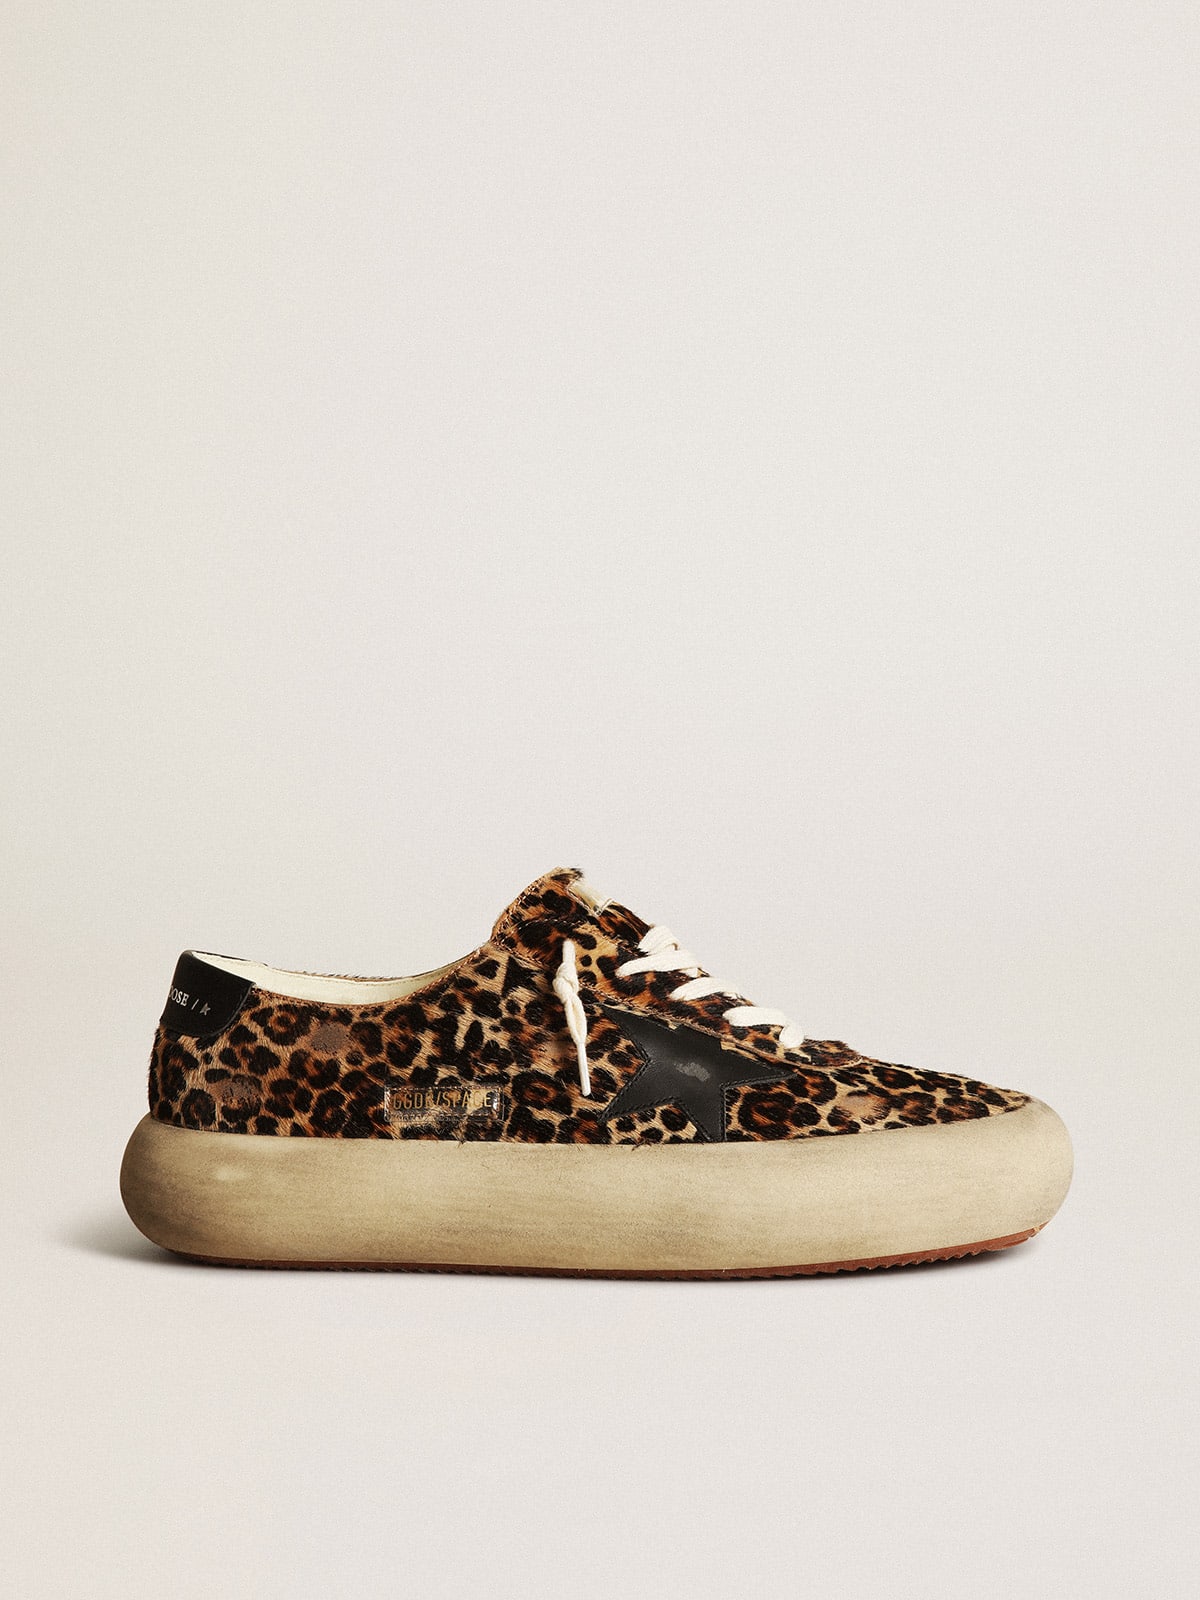 Men's Space-Star shoes in leopard-print pony skin with black leather star and heel tab